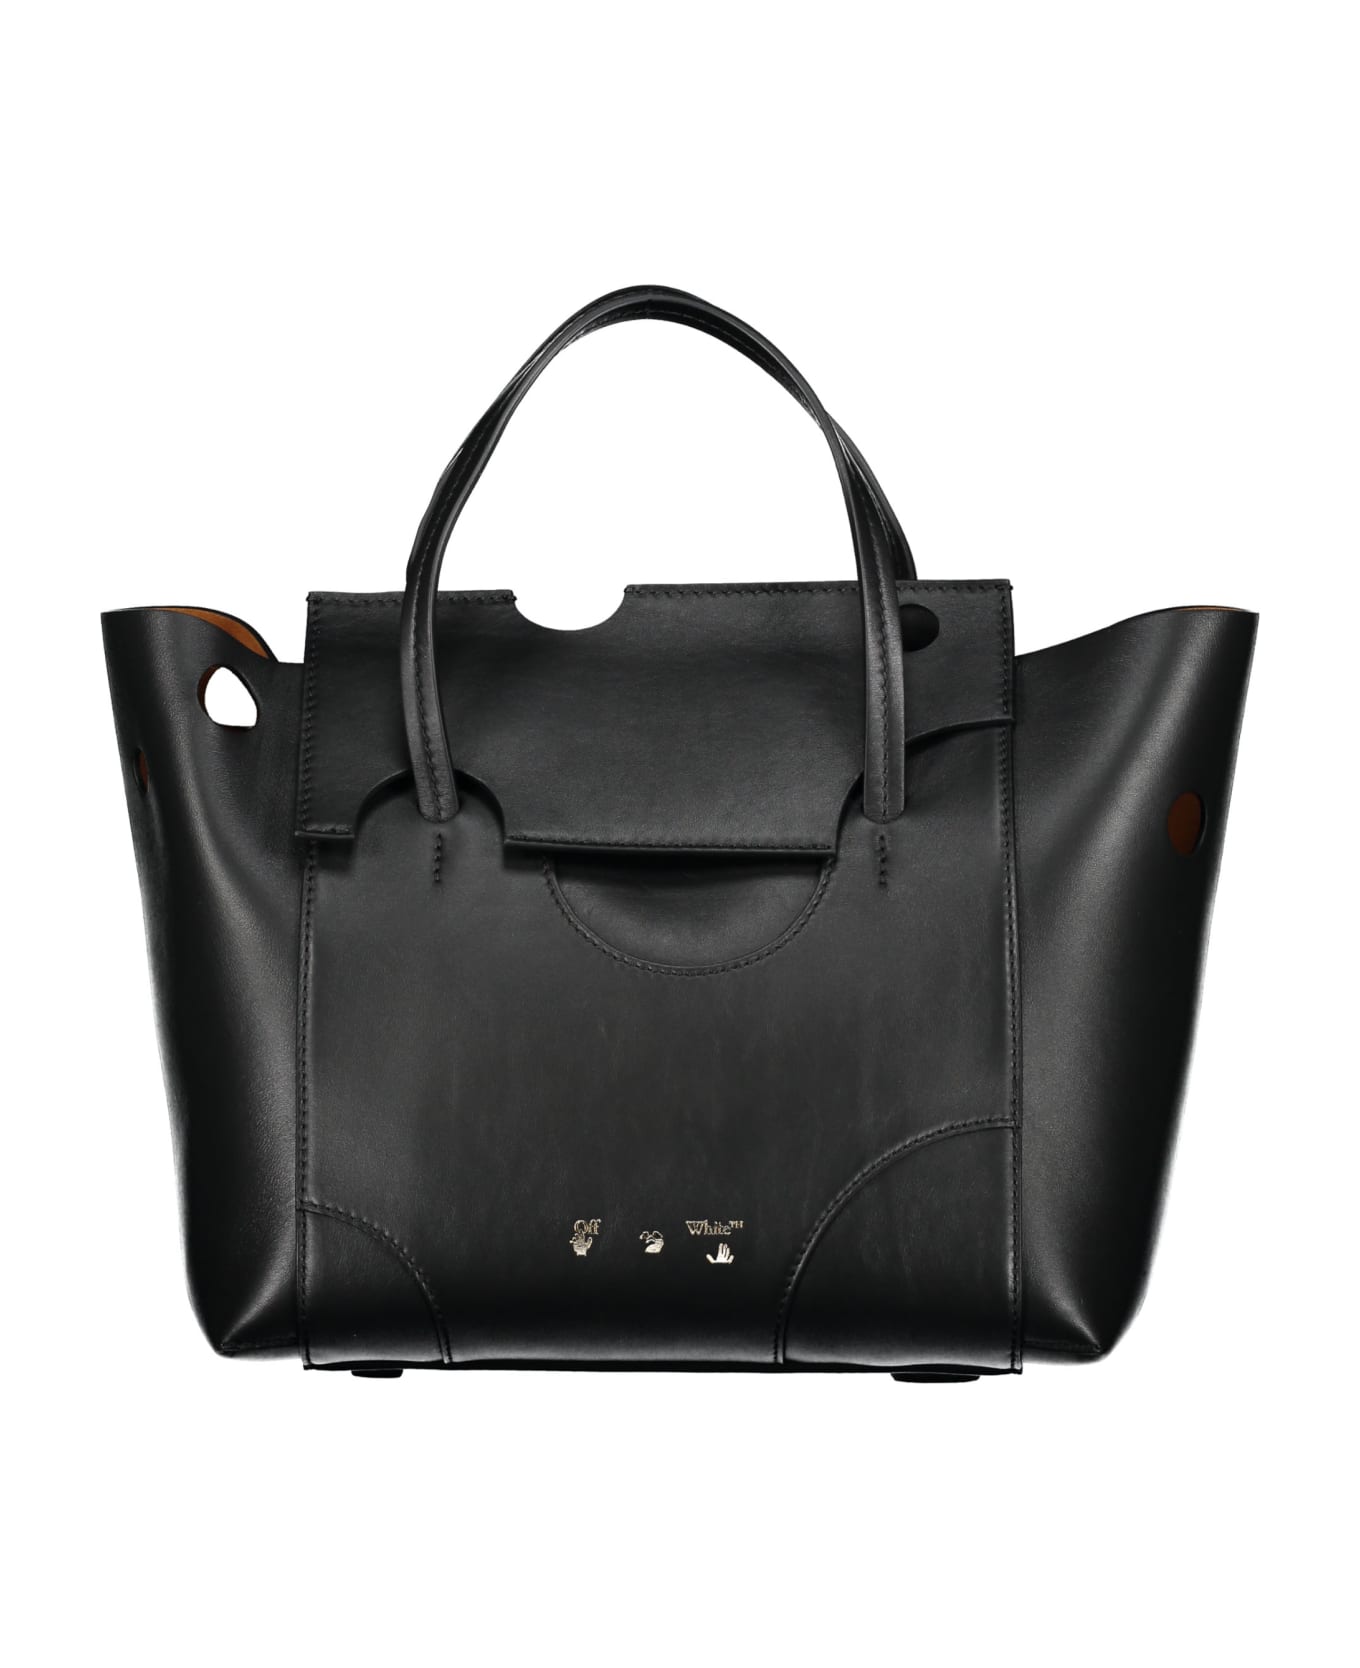 Off-White Leather Tote - black トートバッグ